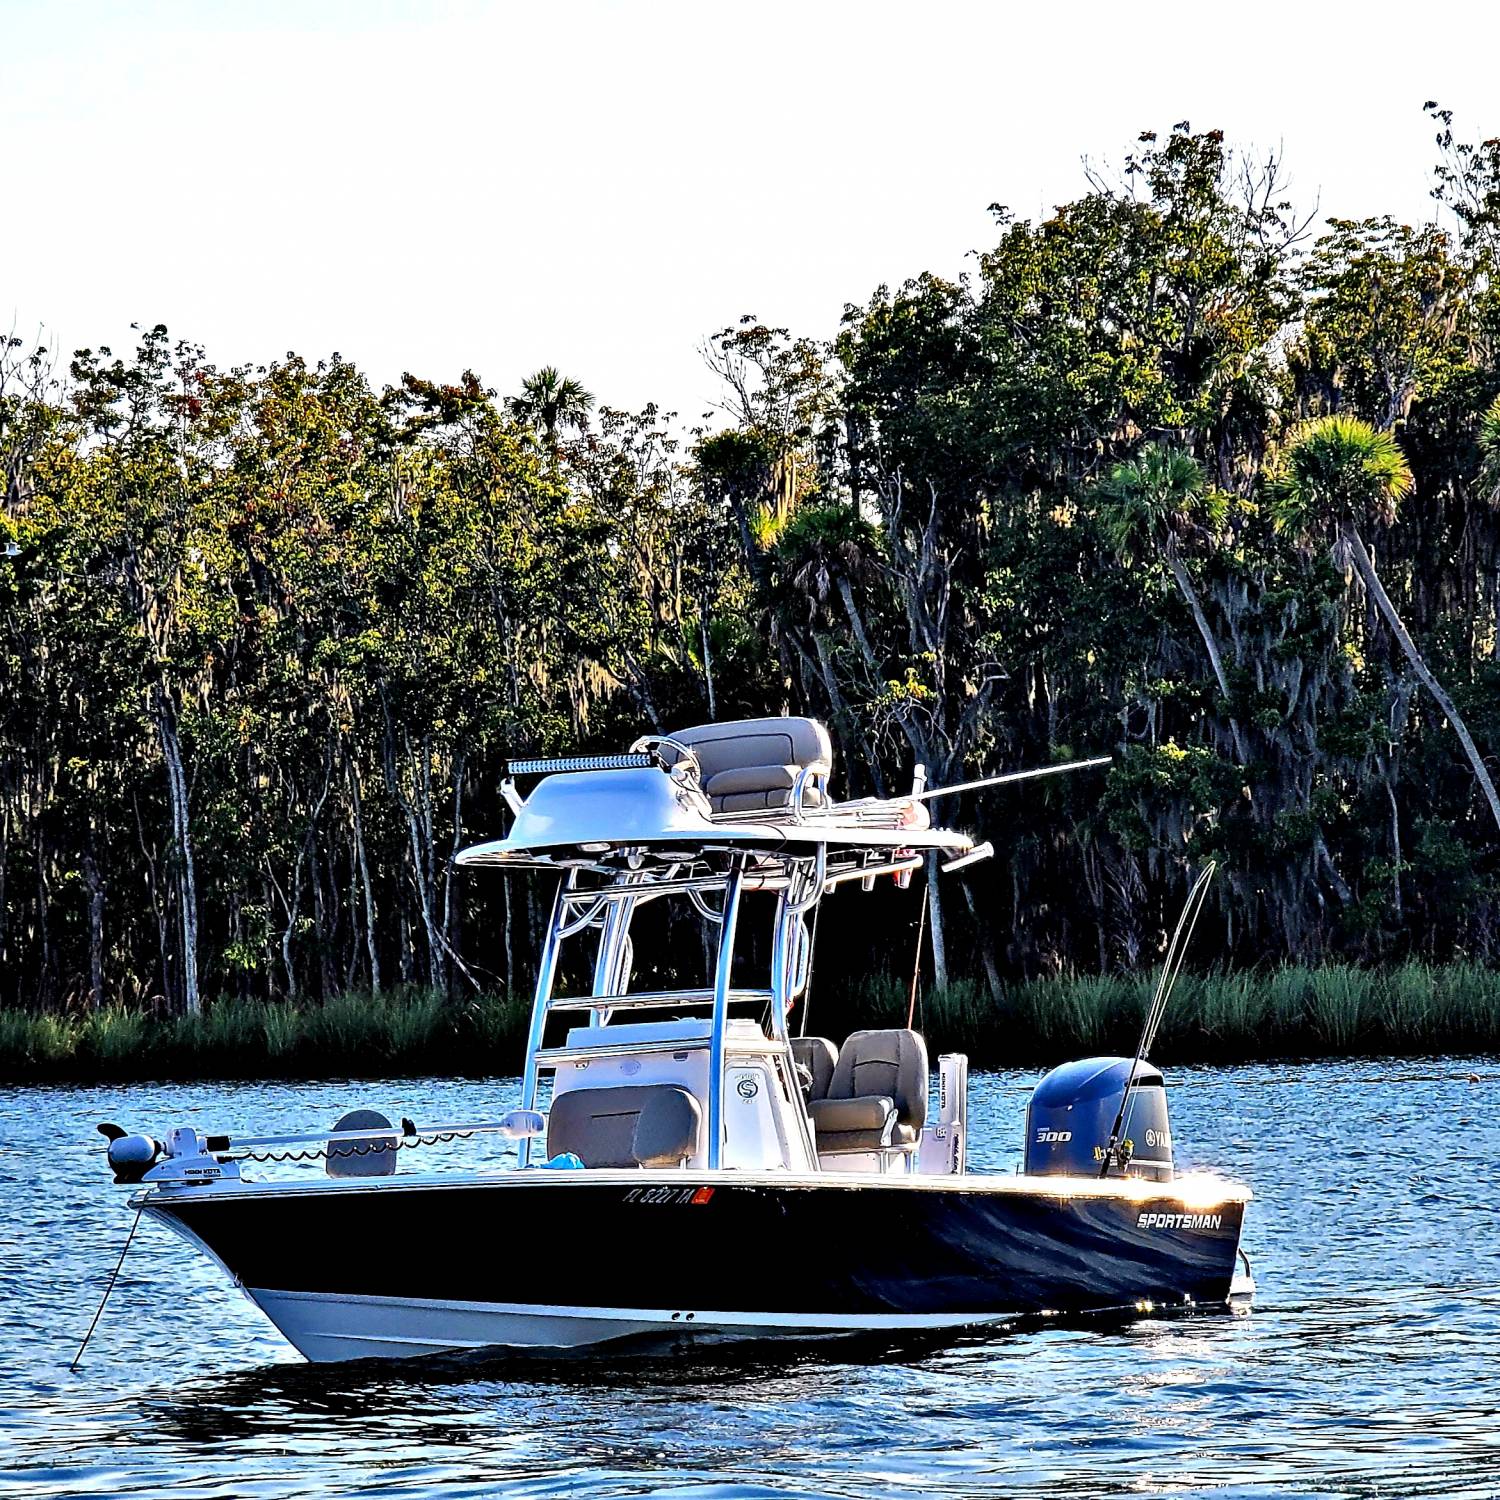 Title: Crystal river scalloping 2021 - On board their Sportsman Masters 247 Bay Boat - Location: Crystal river. Participating in the Photo Contest #SportsmanSeptember2021